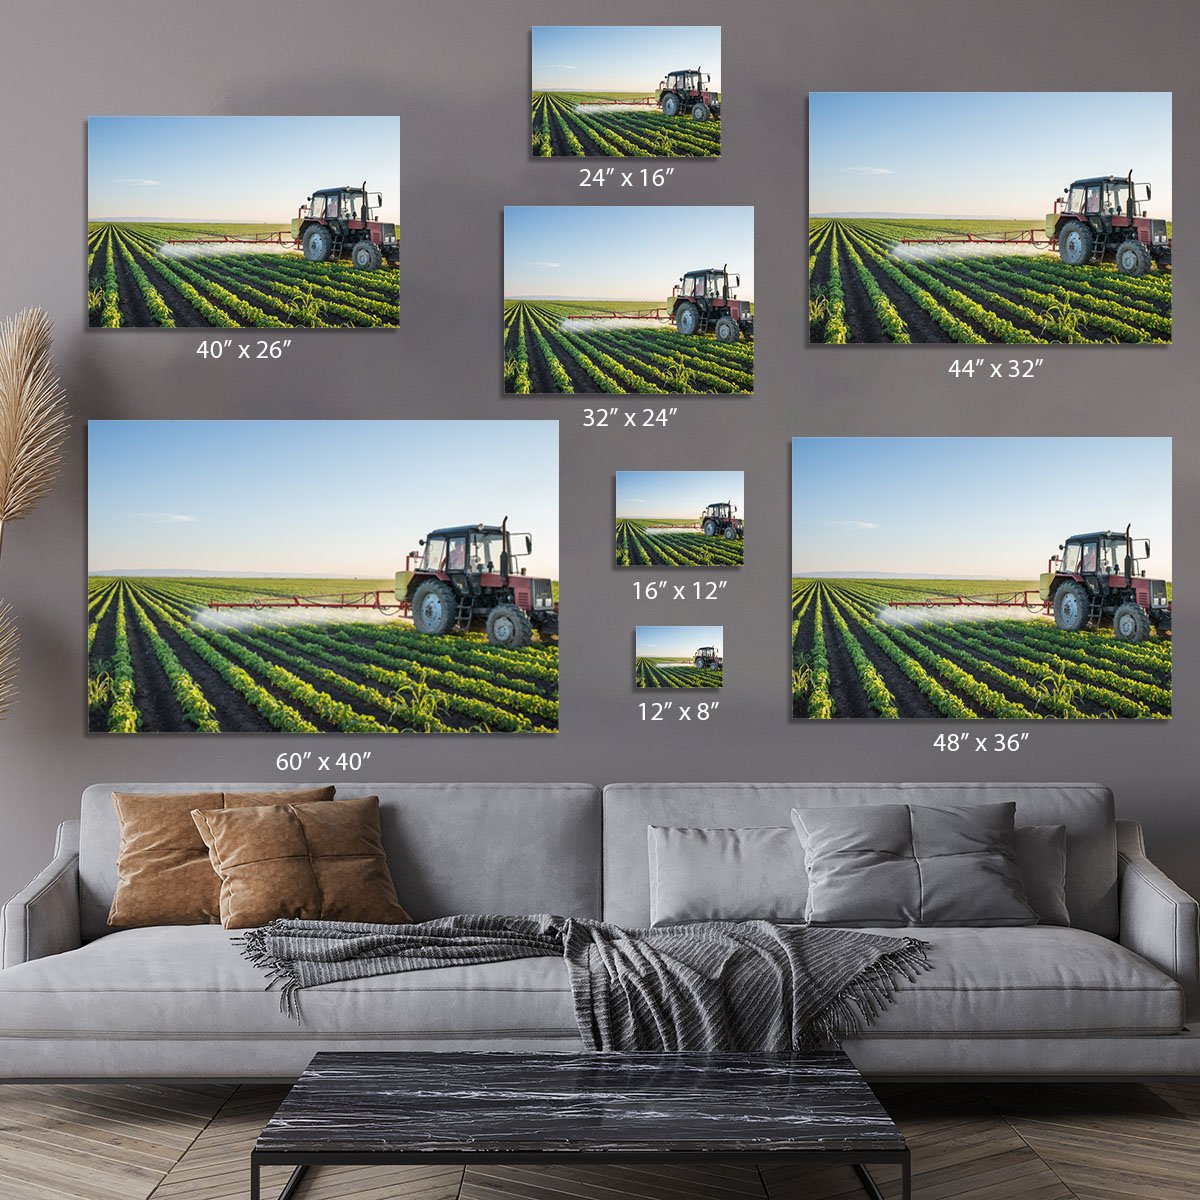 Tractor spraying Canvas Print or Poster